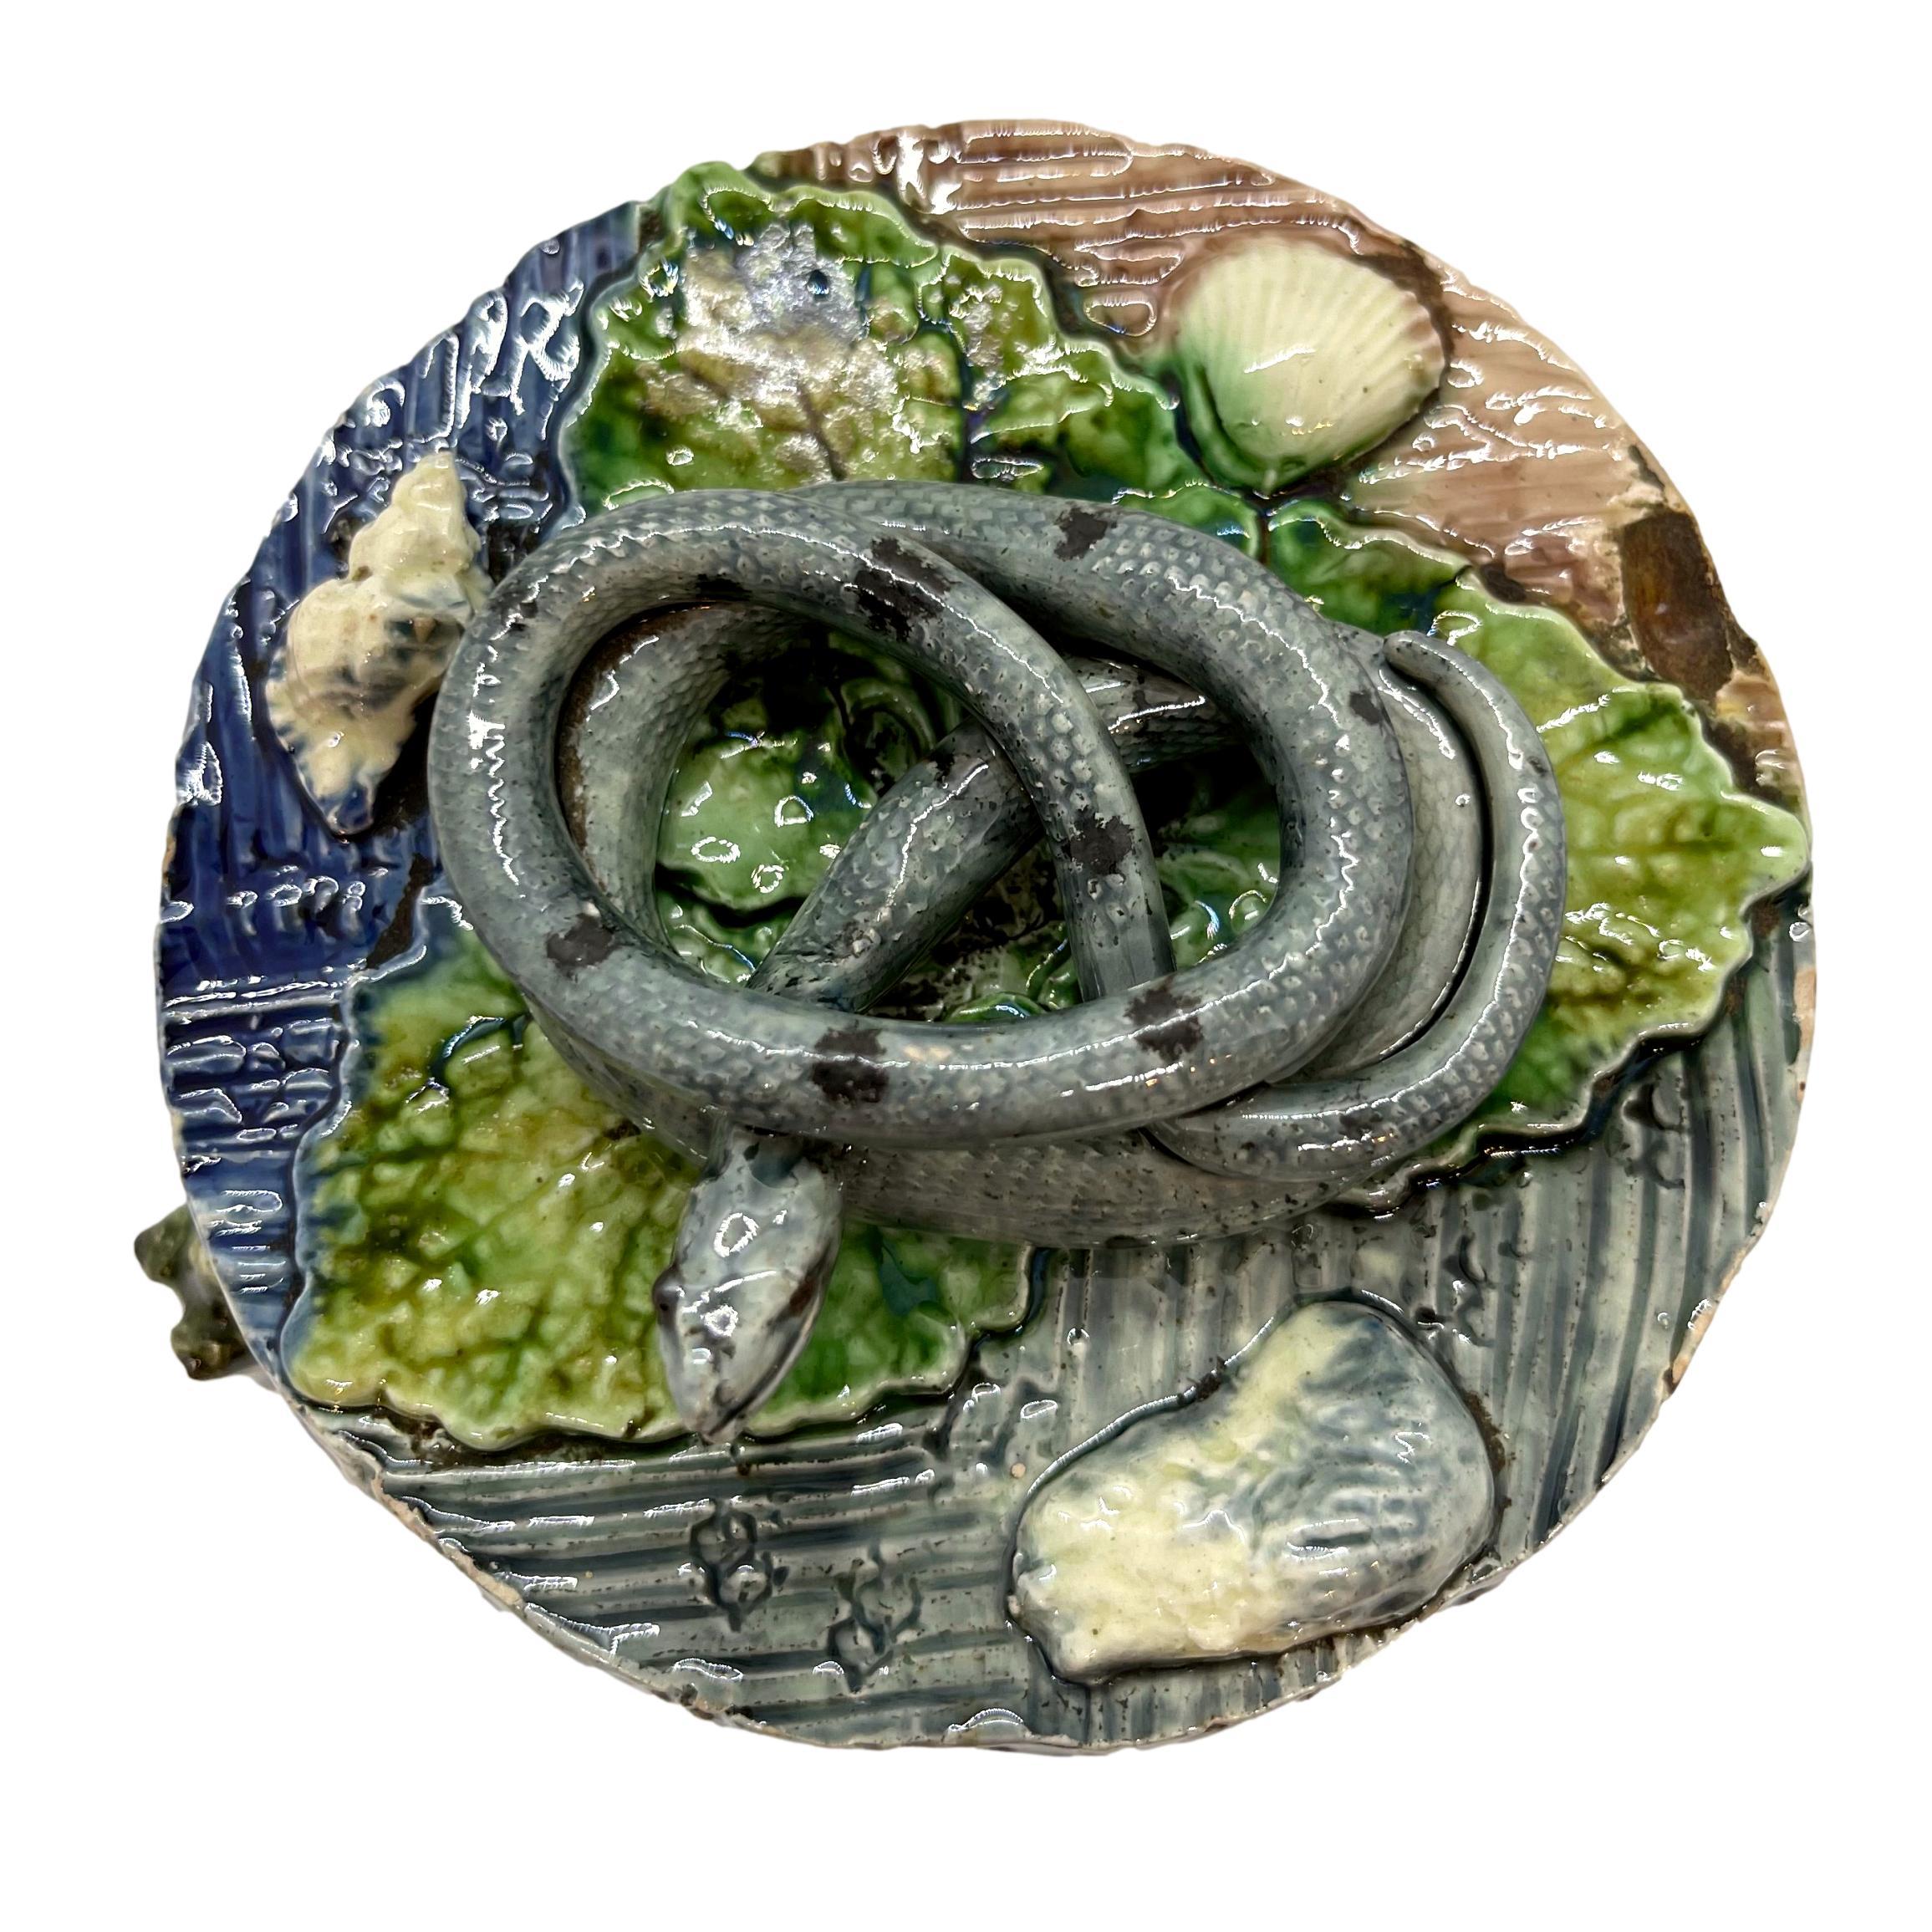 Thomas Sergent Majolica Palissy Ware Humidor with Coiled Snake on Lid, ca, 1880  2